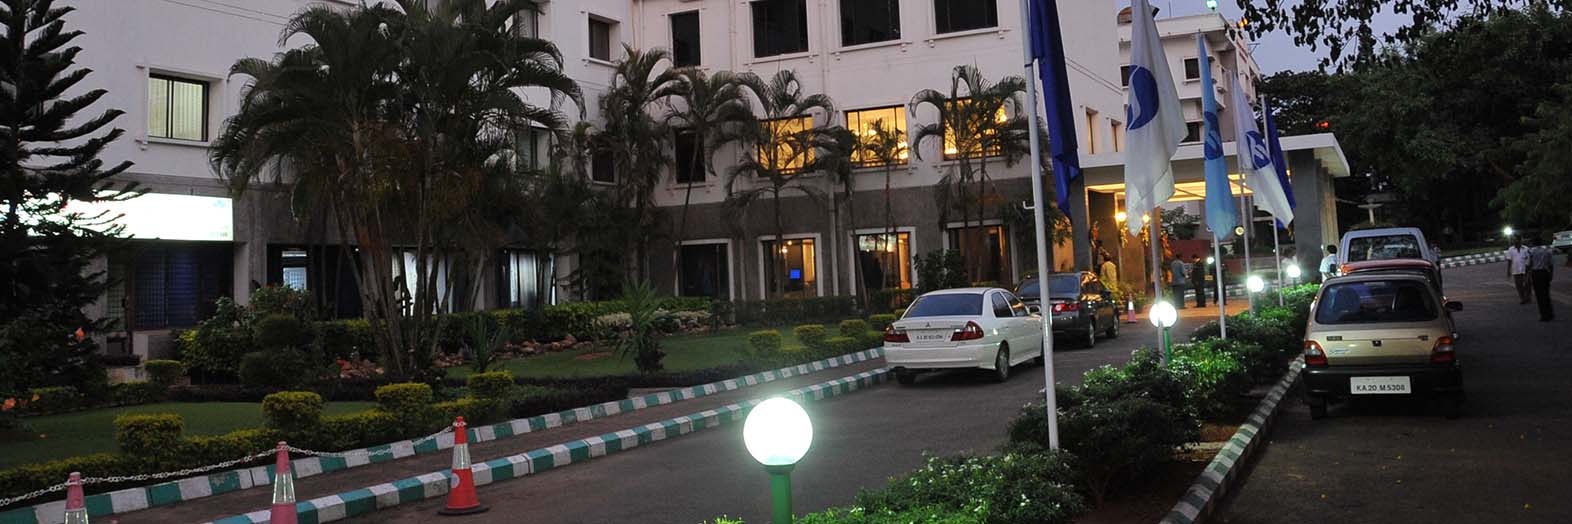 Hotels in  Manipal - Fortune Inn Valley View